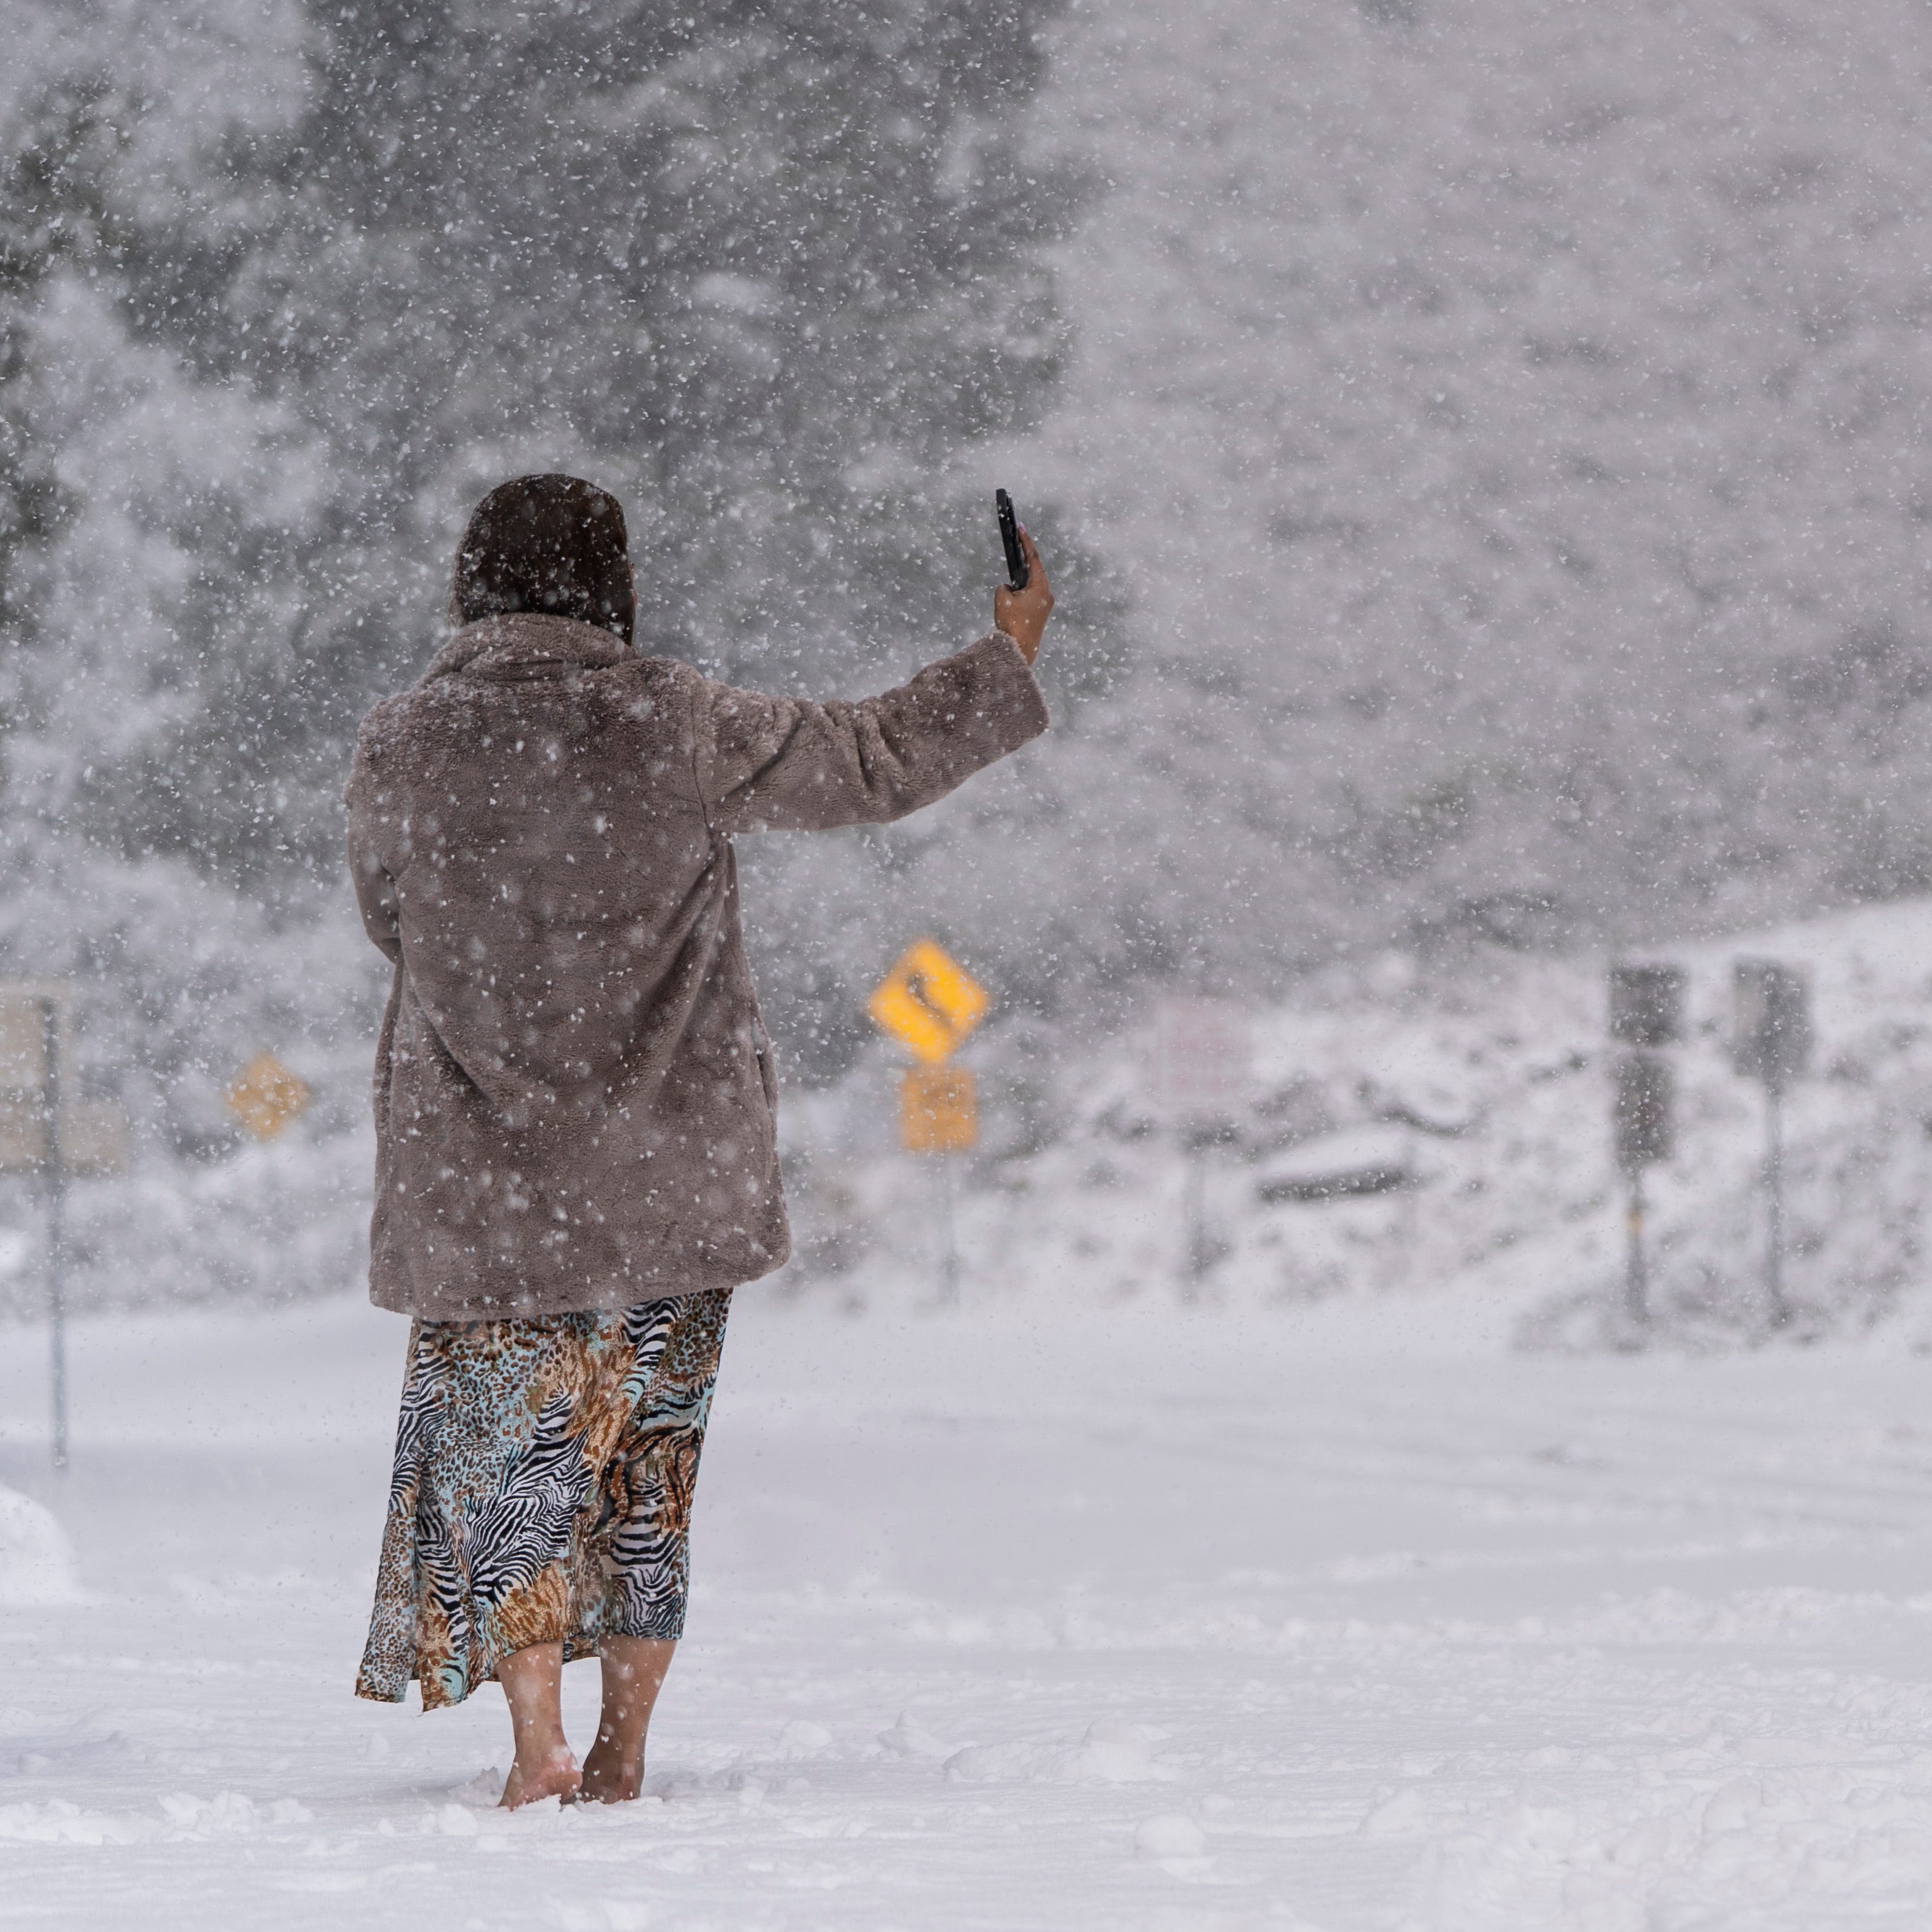 A visitor stands on a snow-covered road while taking a selfie in the Angeles National Forest near La Canada Flintridge, Calif., Thursday, Feb. 23, 2023.